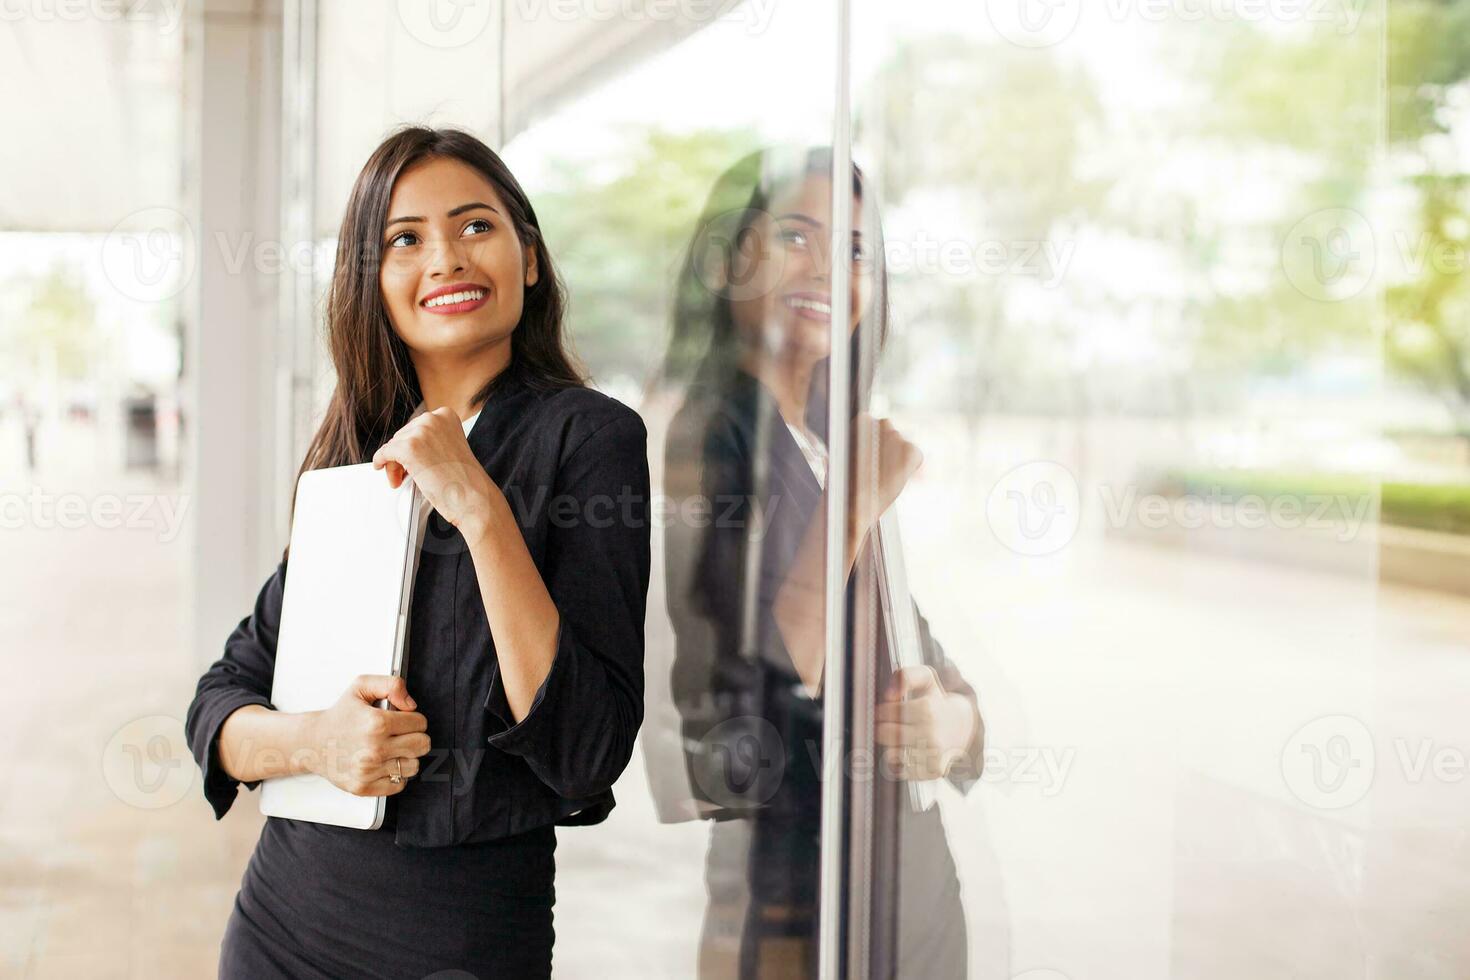 A beautiful professional Indian woman wearing a suit standing holding a laptop and smiling by a glass window photo